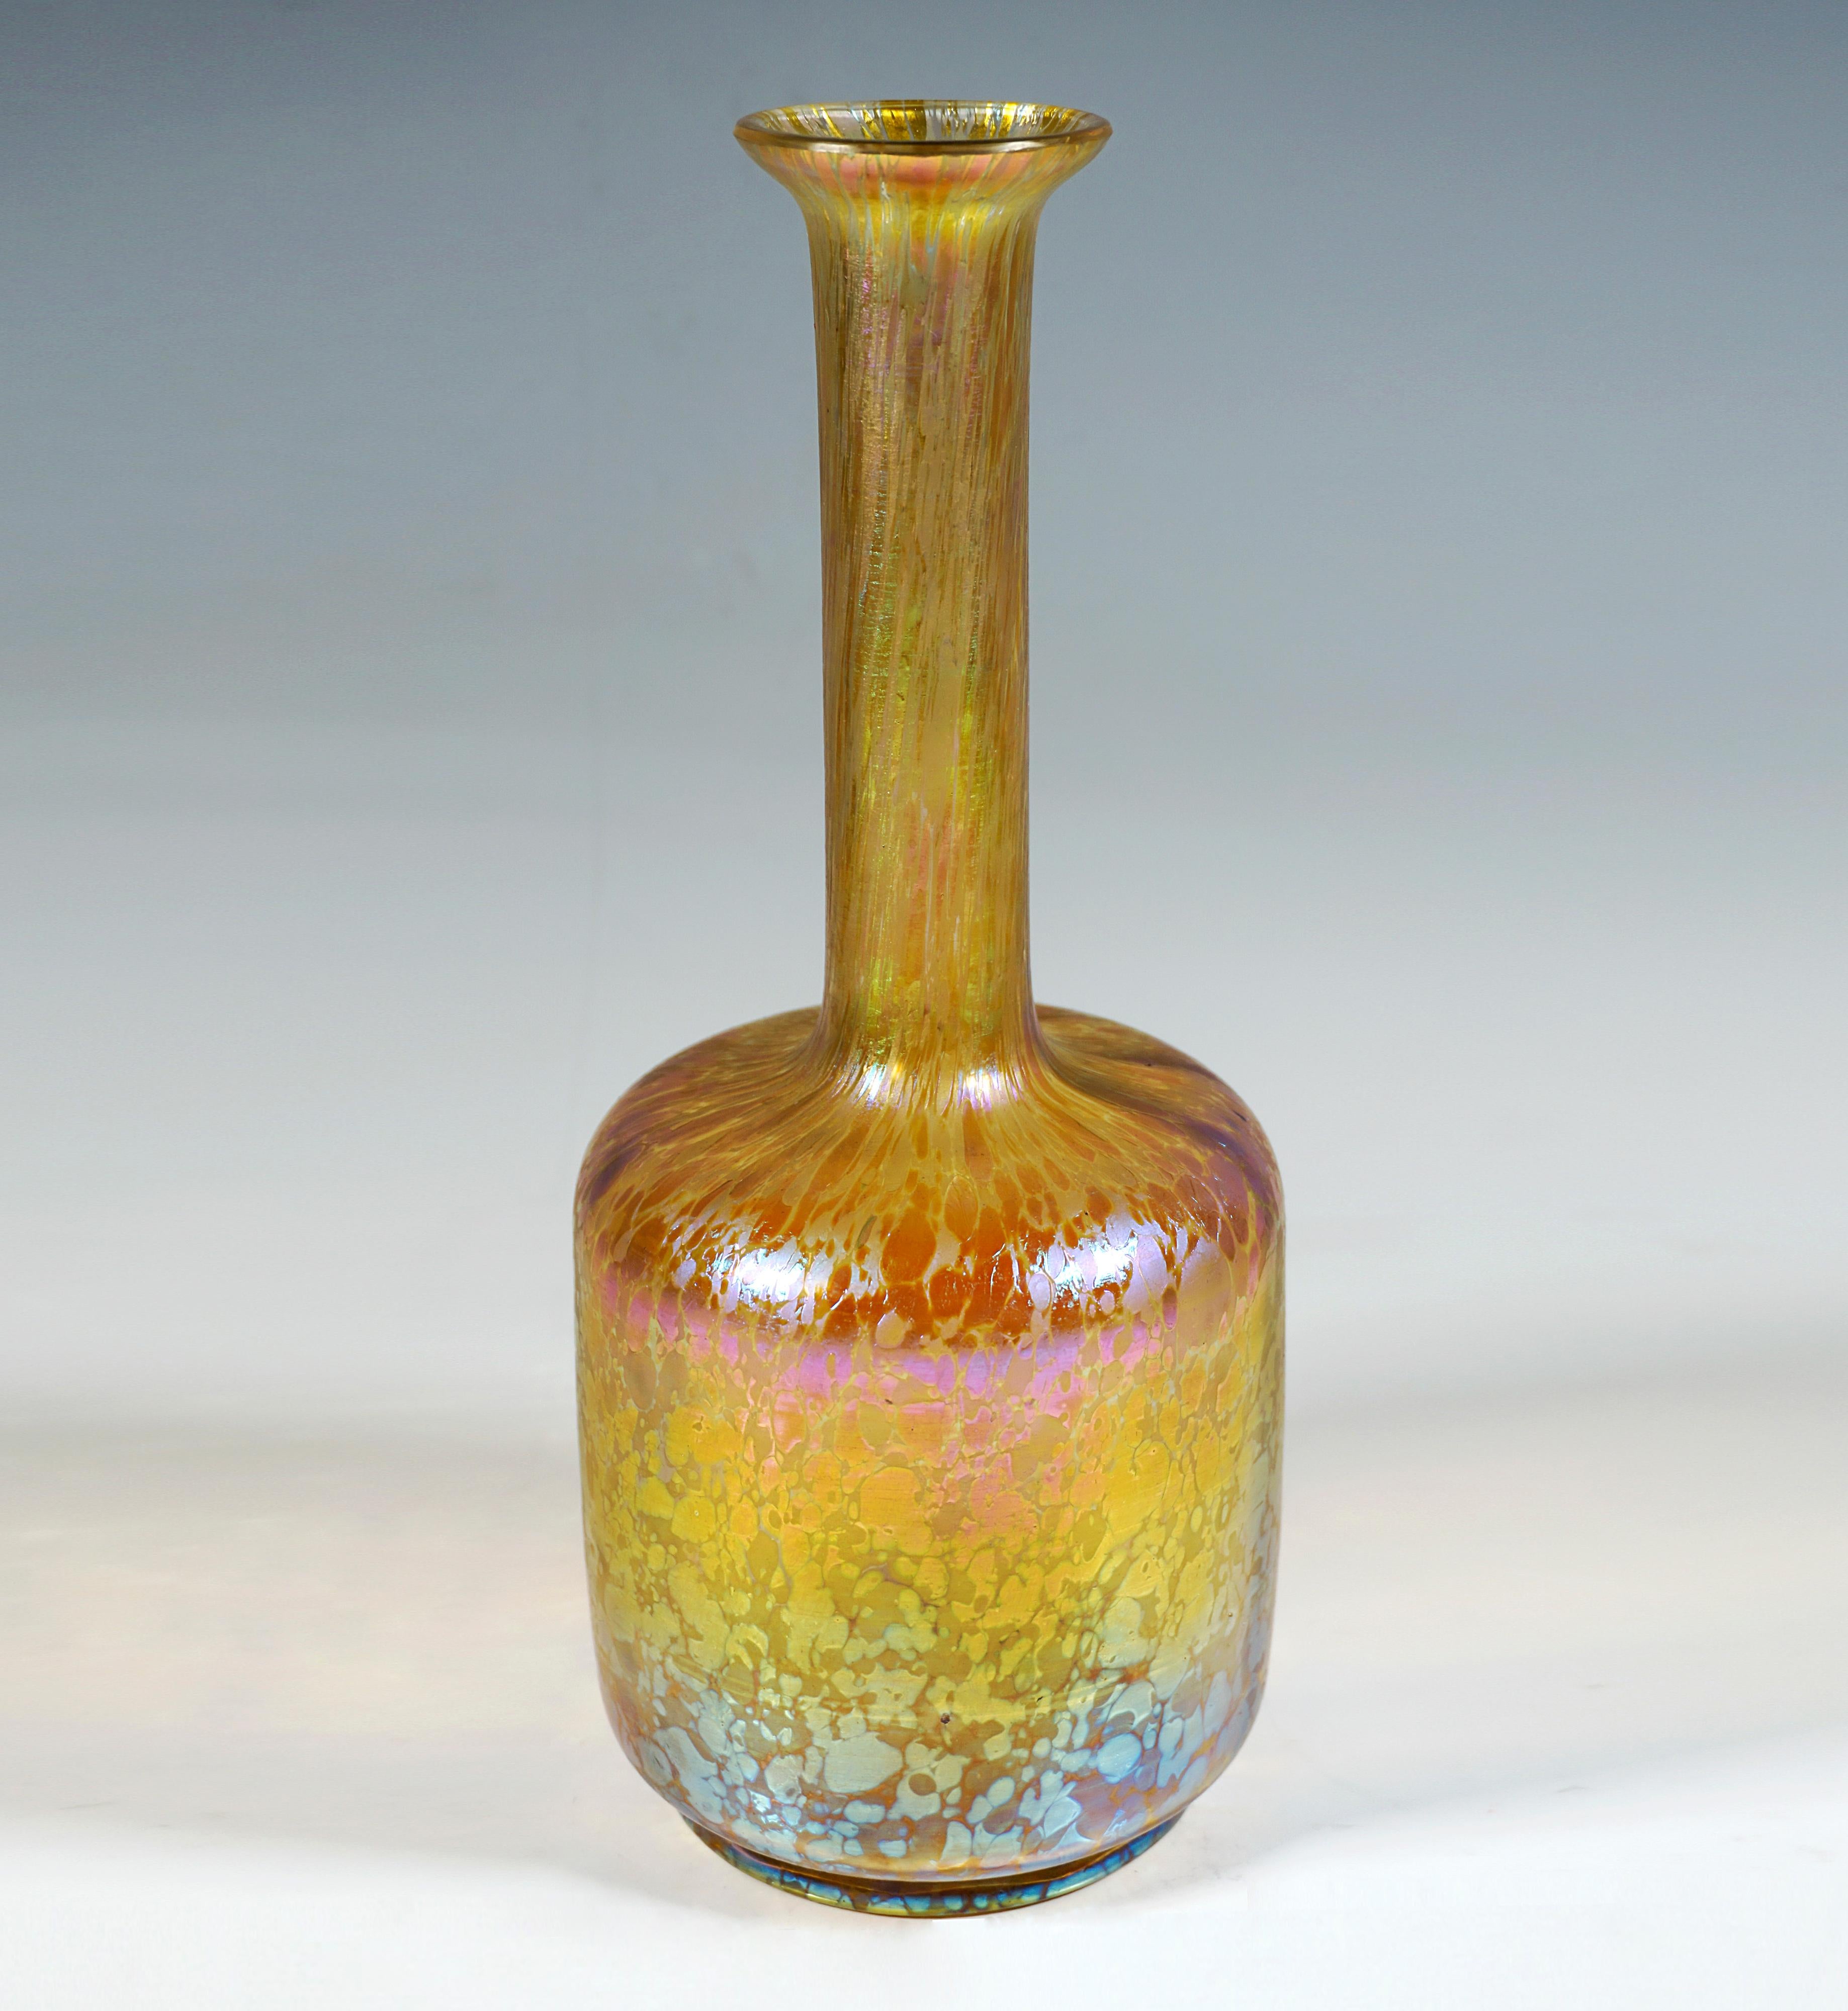 Finest Bohemian Art Nouveau Glass Vase:
Mould-blown glass vase, cylindrical lower body on a recessed, flush stand, long, slender neck with flared rim.

Shape: Series I, Prod. nr. - PN 7601,  year 1898

Decor: Decor Candia Papillon
Candia underlaid